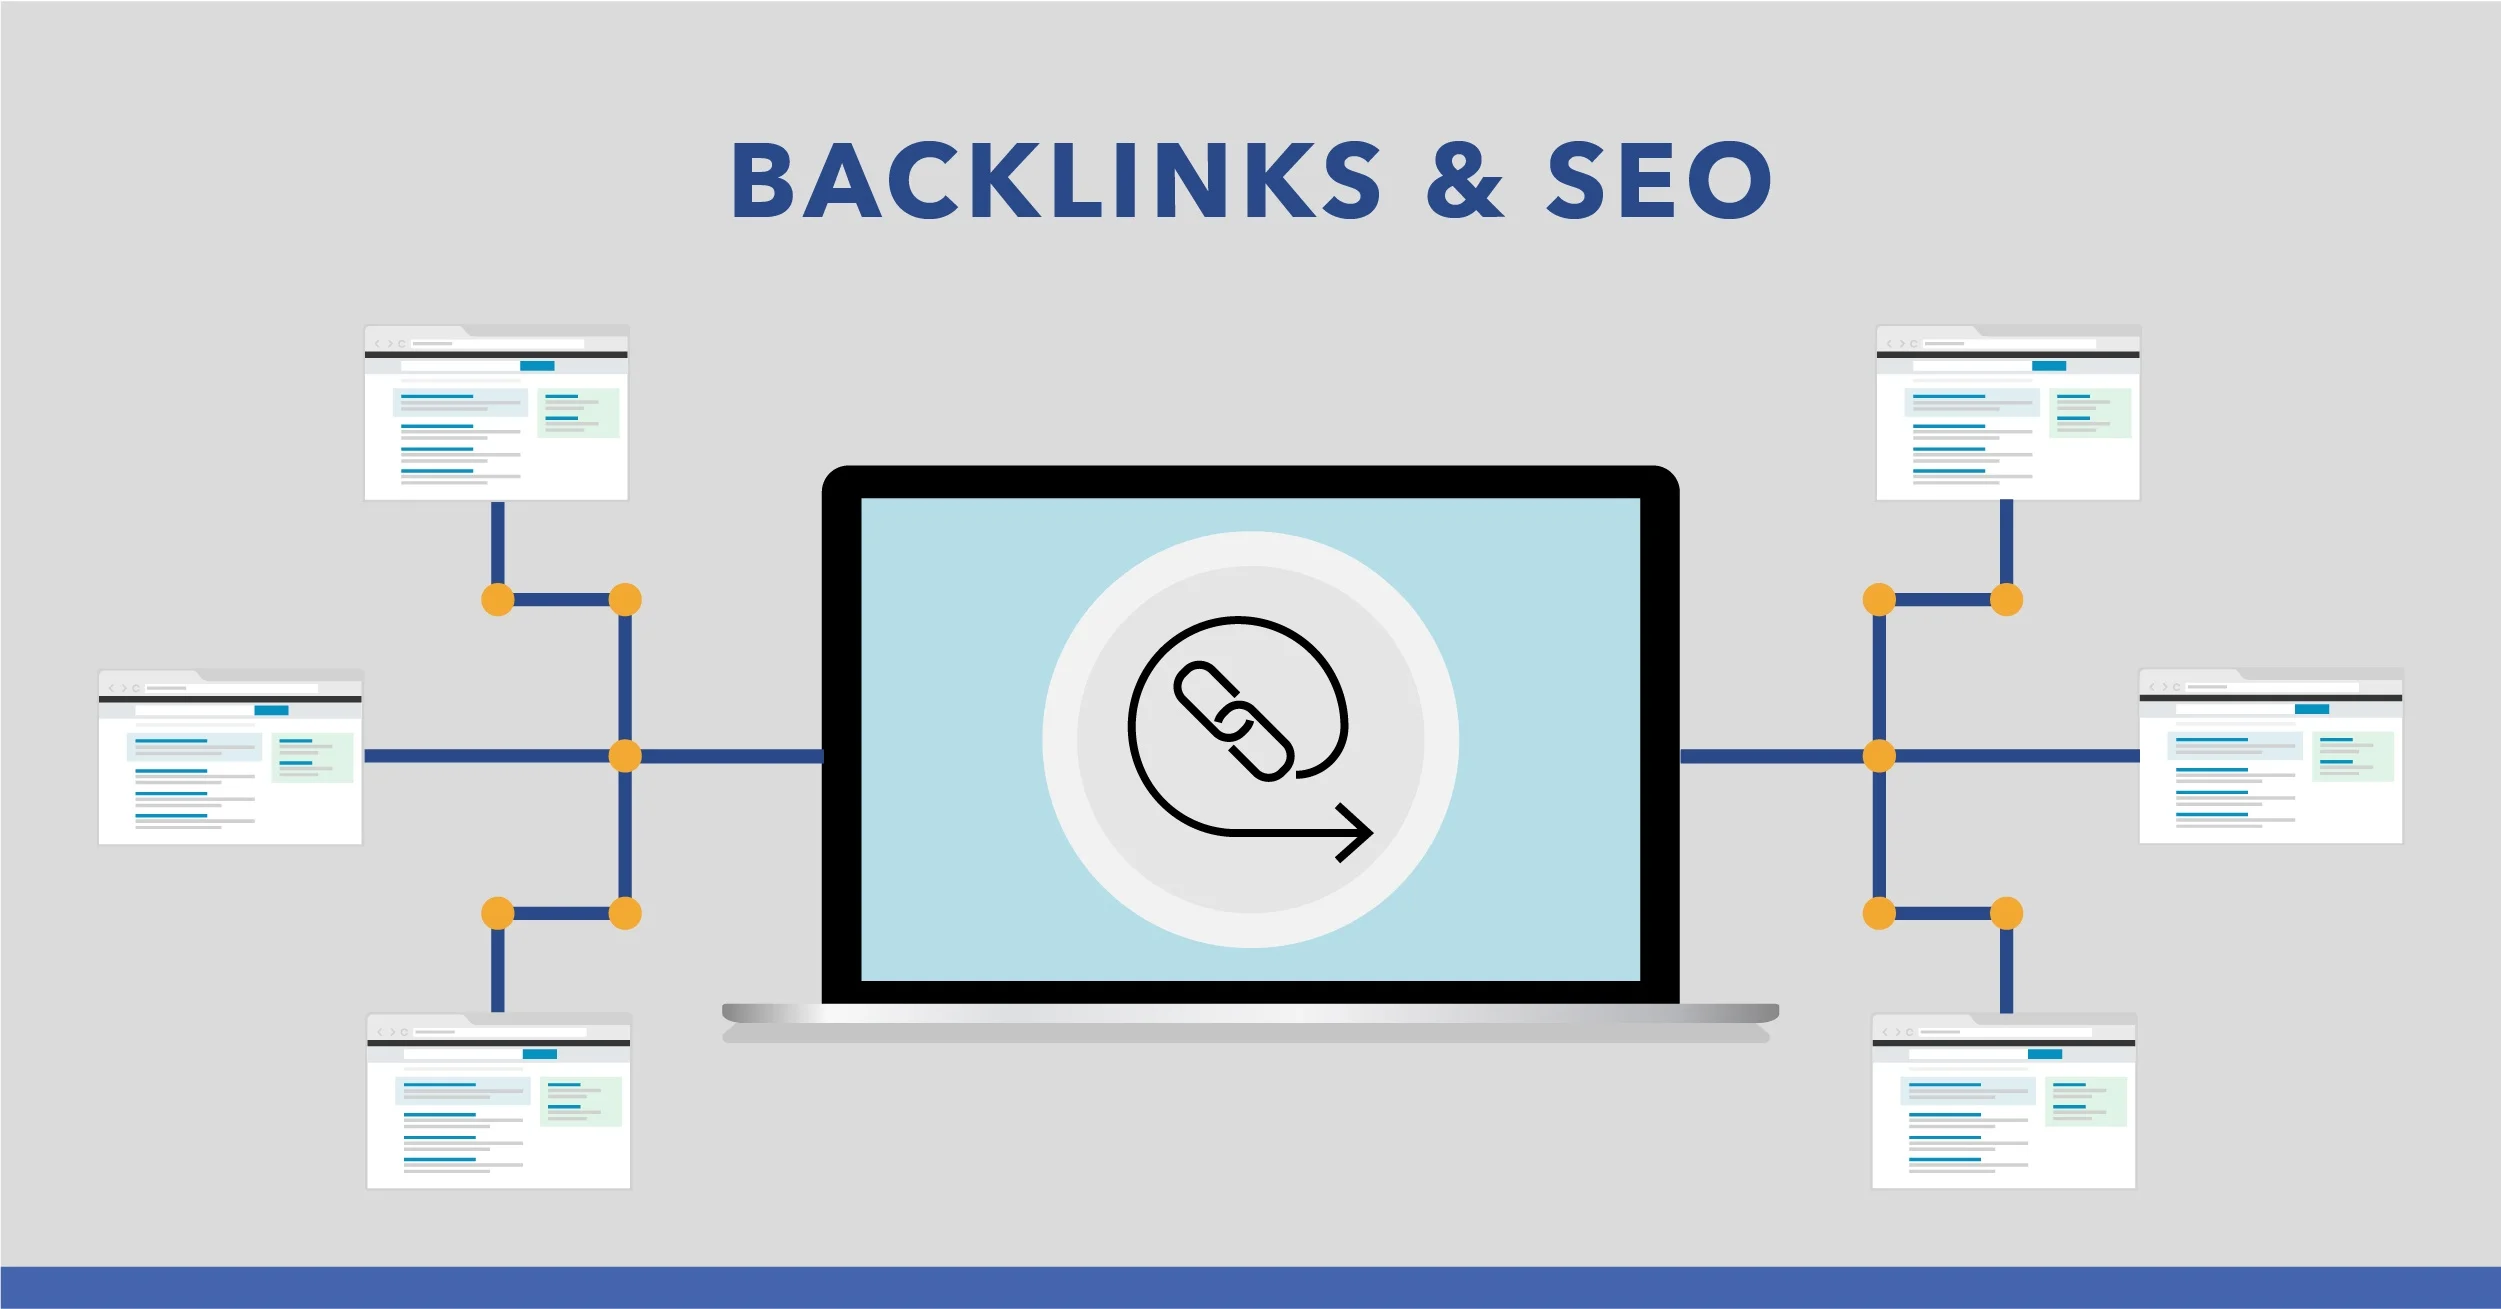 What Is BACKLINKS and How Does It Work?